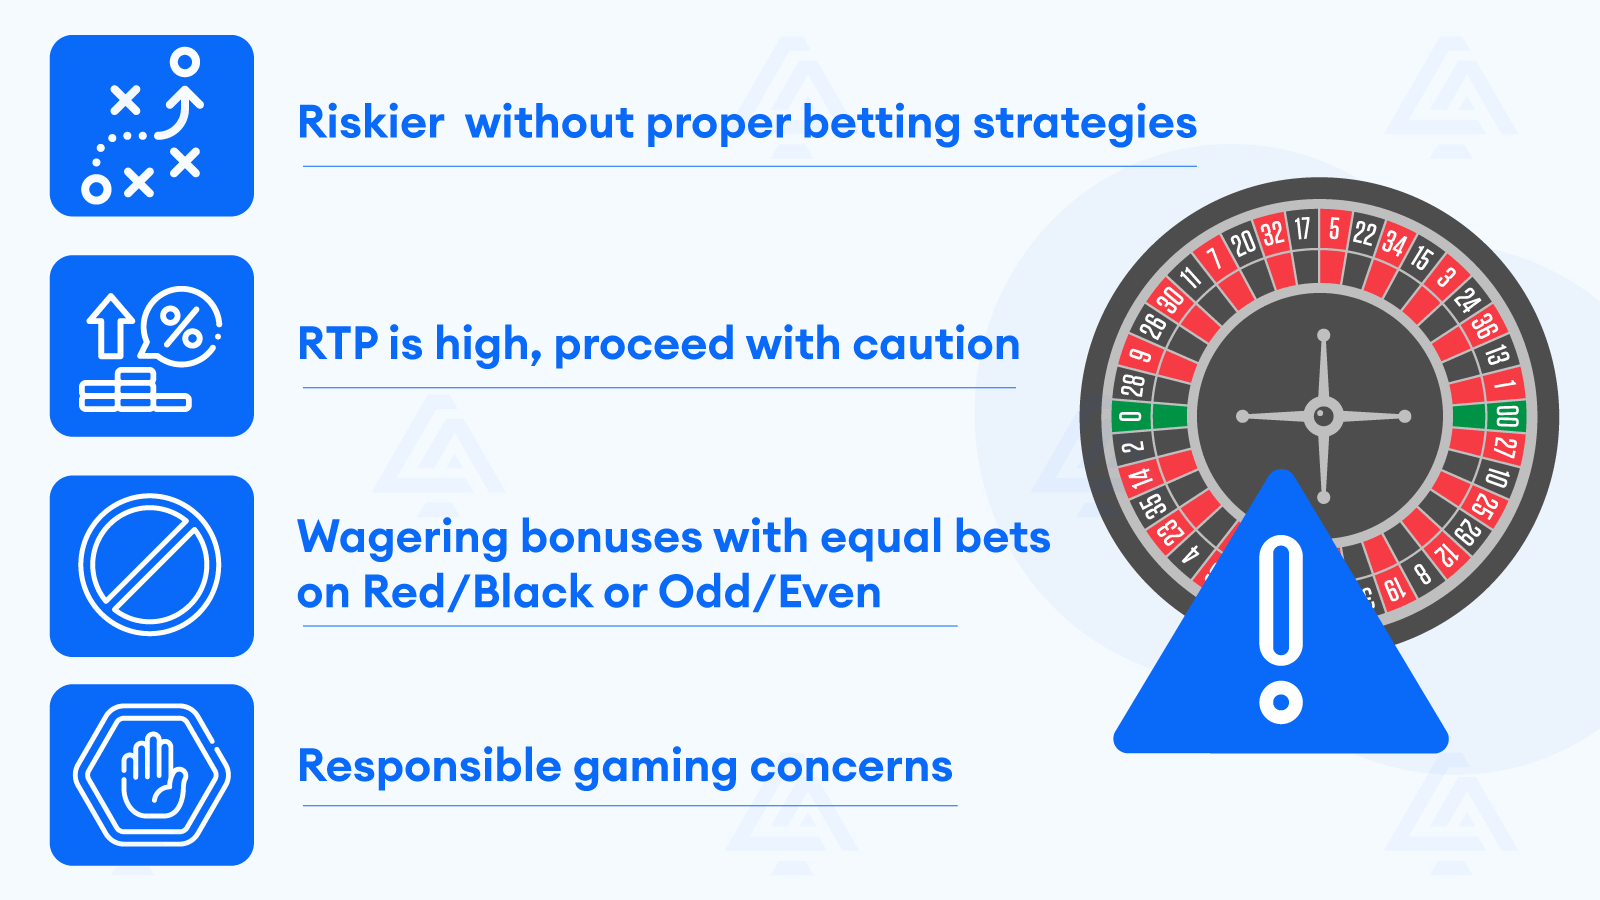 4 things to watch out for - American Roulette